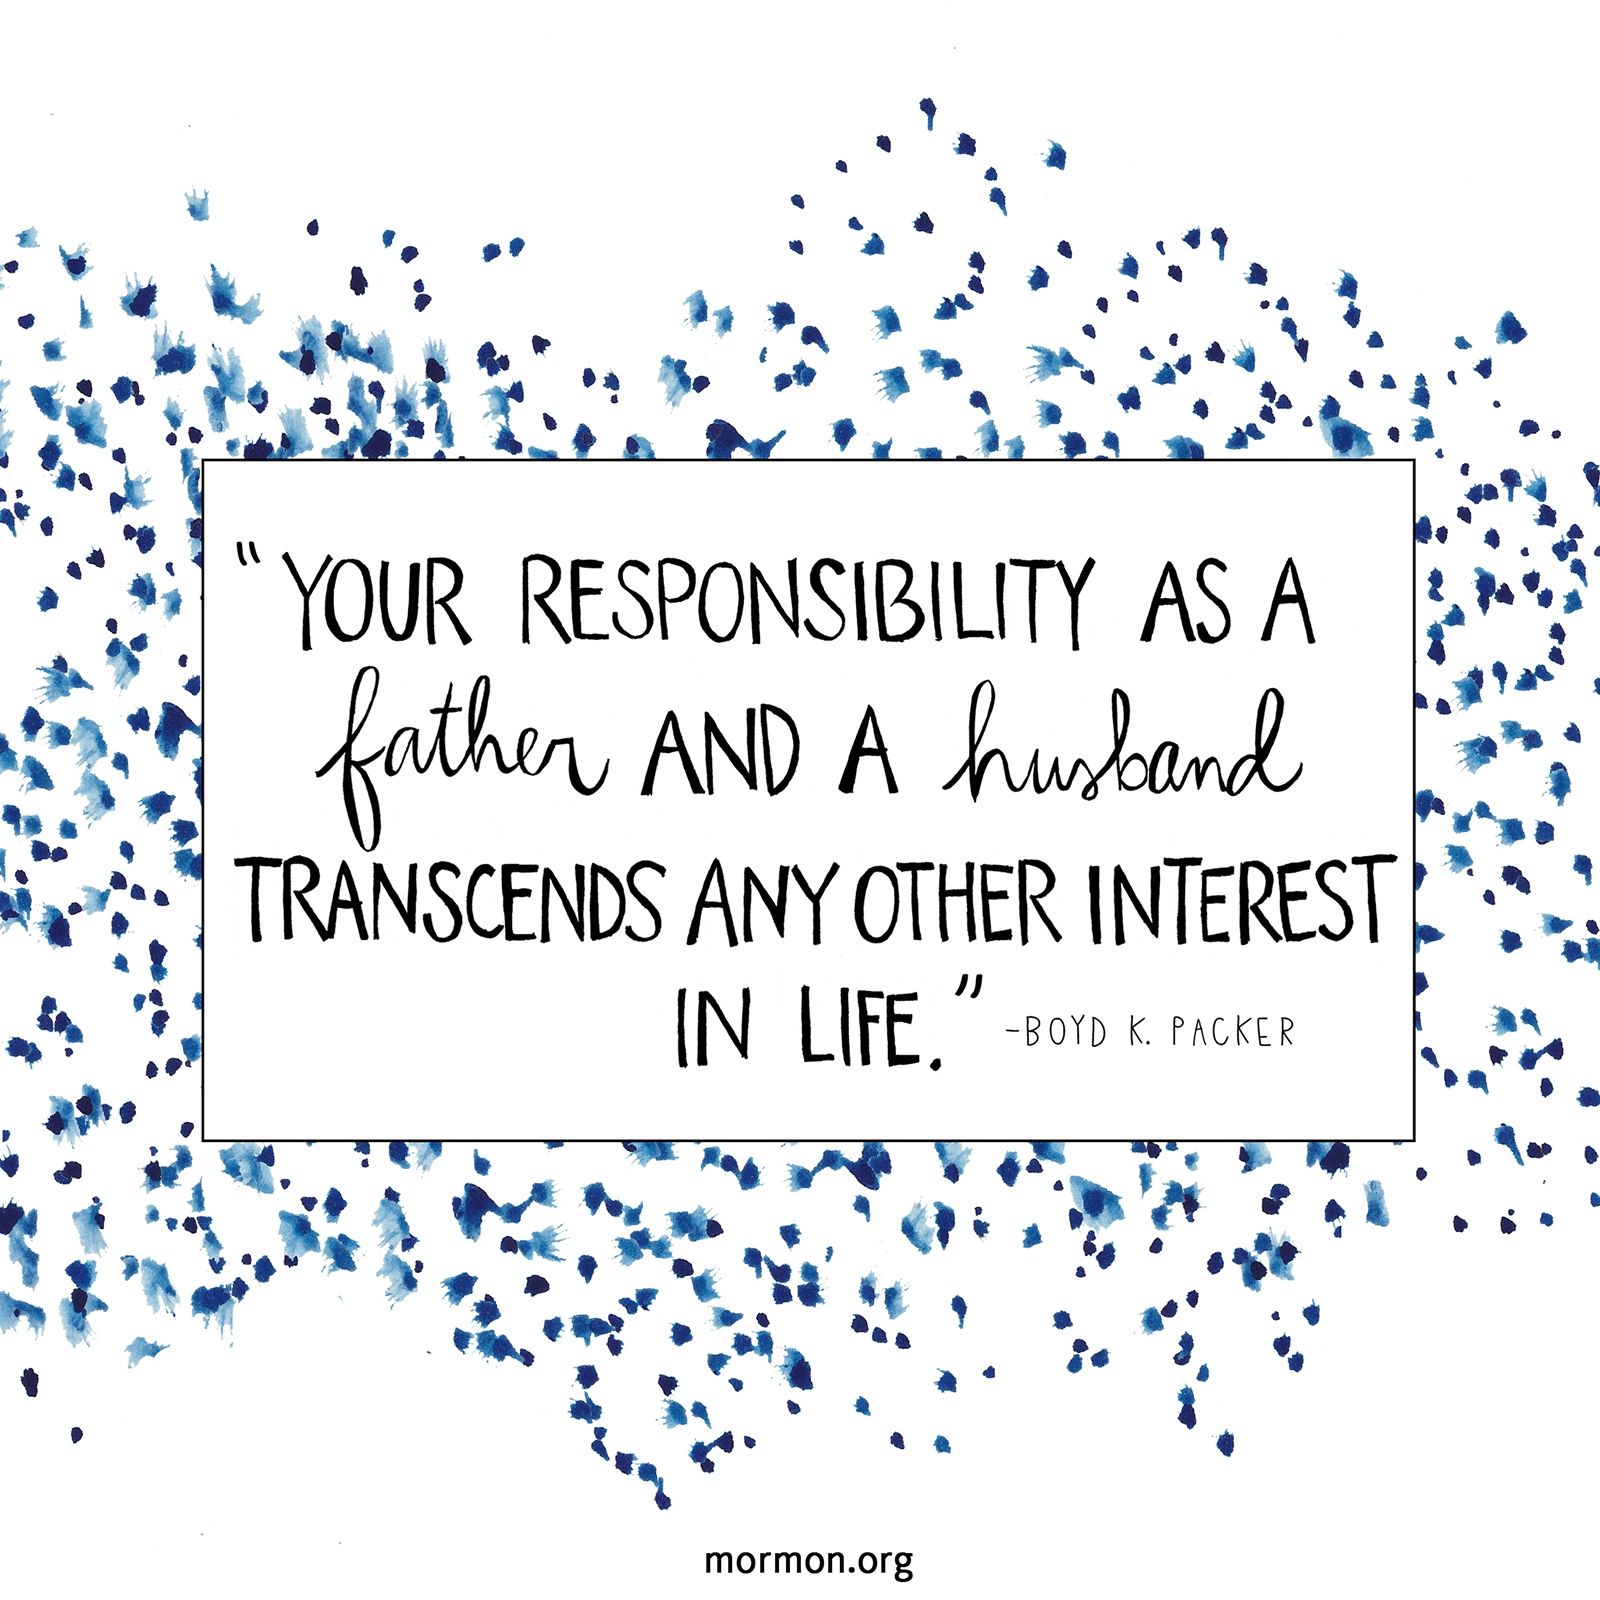 “Your responsibility as a father and a husband transcends any other interest in life.”—President Boyd K. Packer, “The Father and the Family”